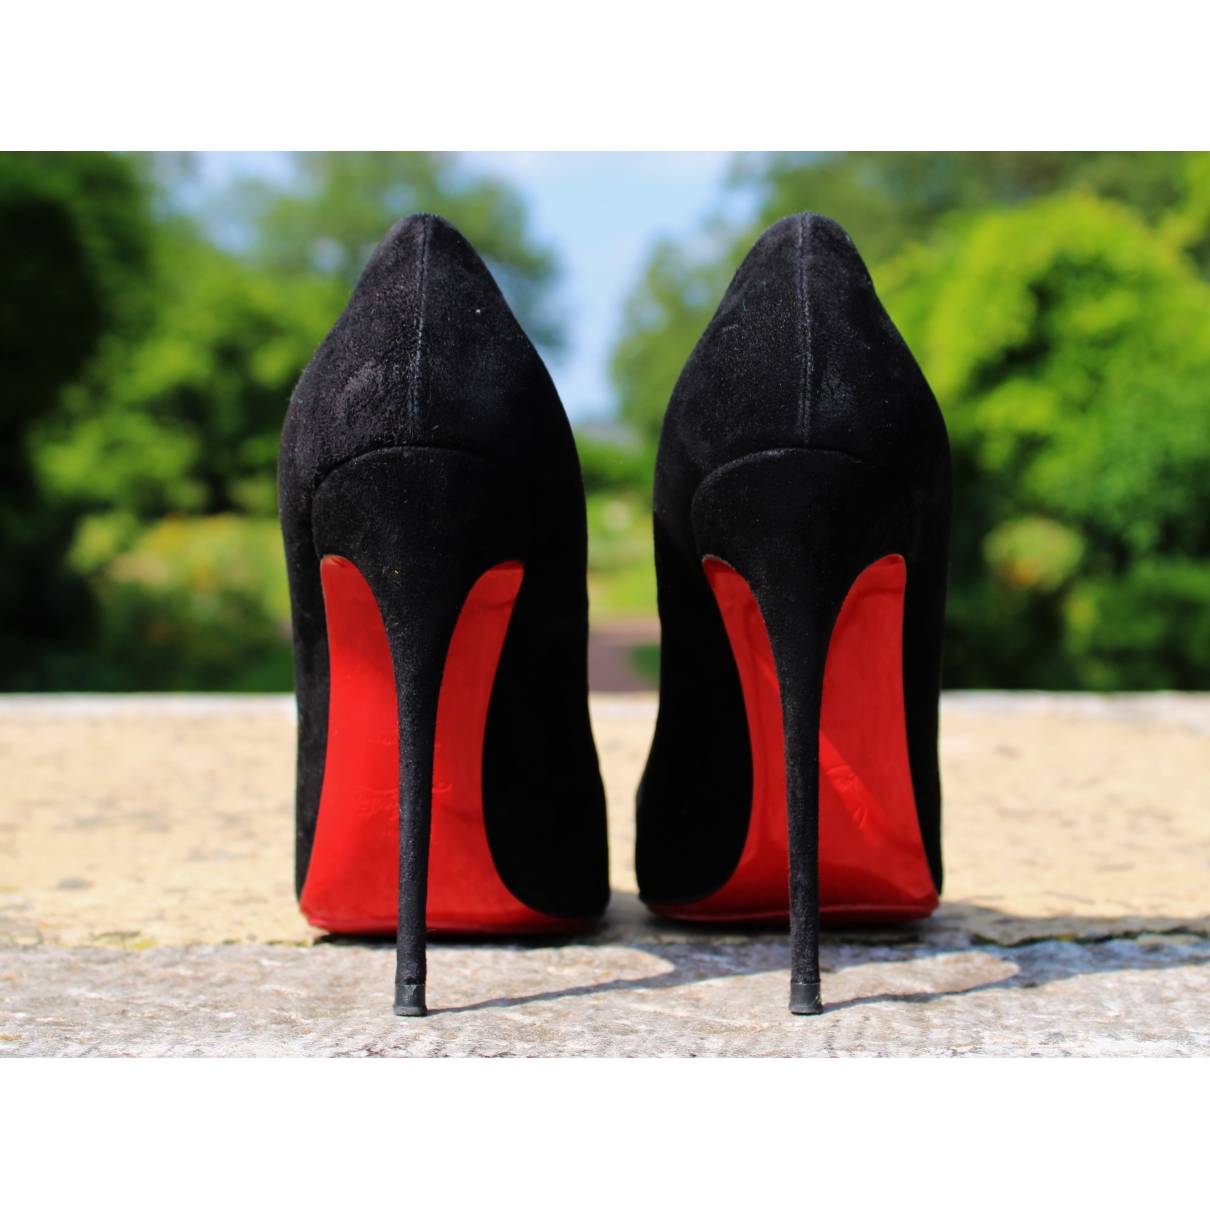 Christian Louboutin - Authenticated So Kate Heel - Suede Black for Women, Very Good Condition